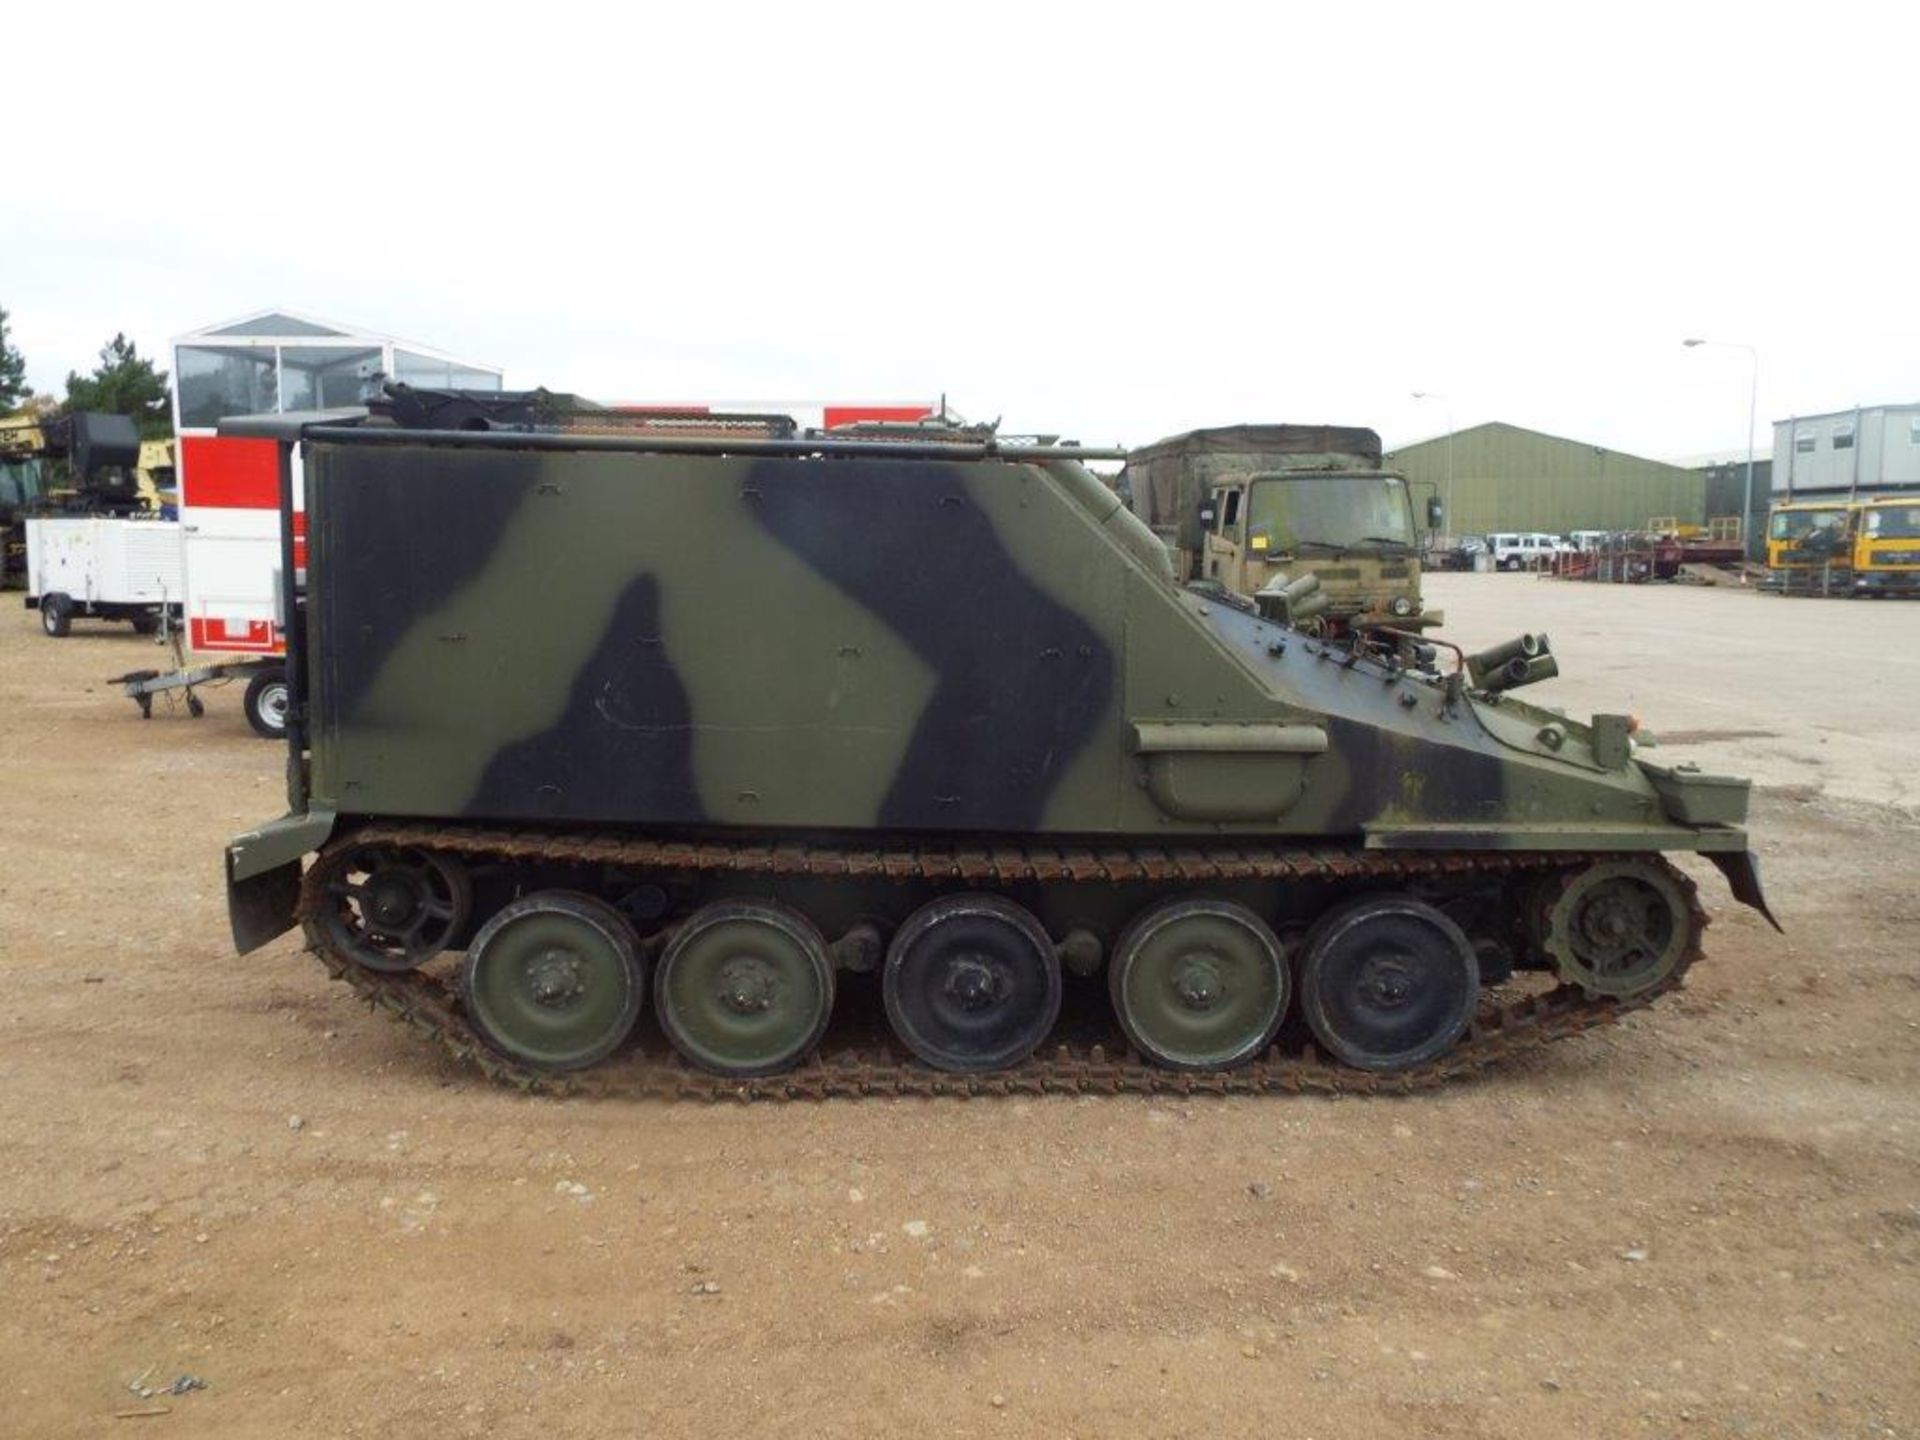 CVRT (Combat Vehicle Reconnaissance Tracked) FV105 Sultan Armoured Personnel Carrier - Image 8 of 30